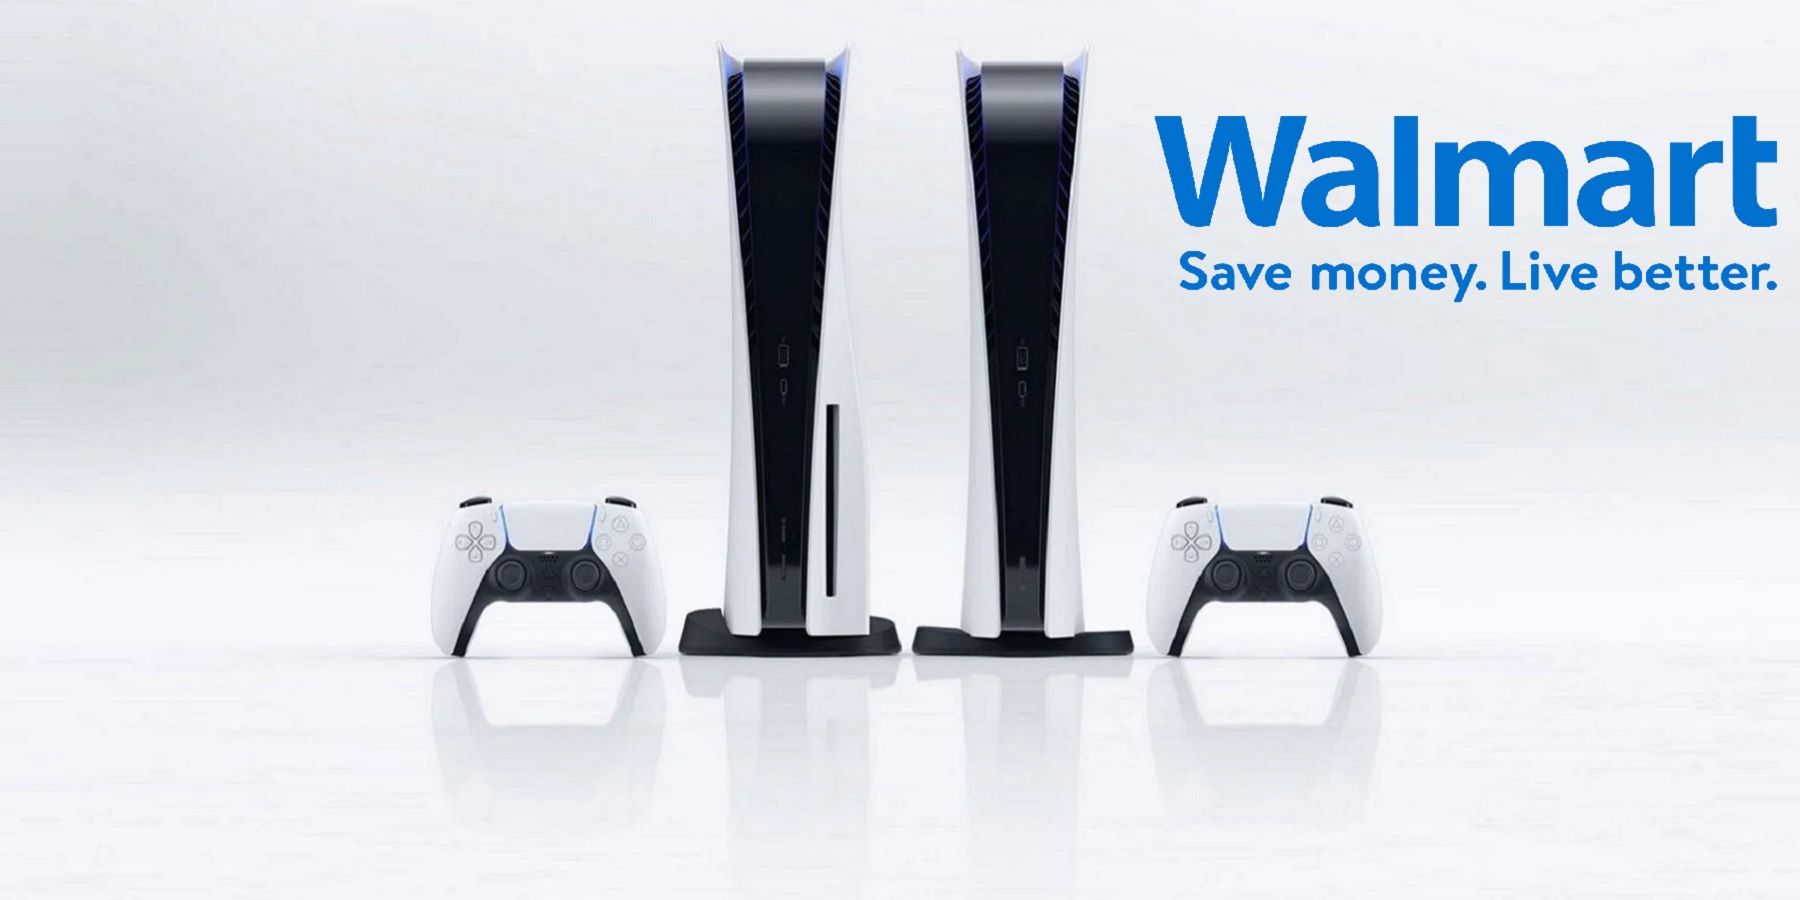 ps5 consoles with walmart logo